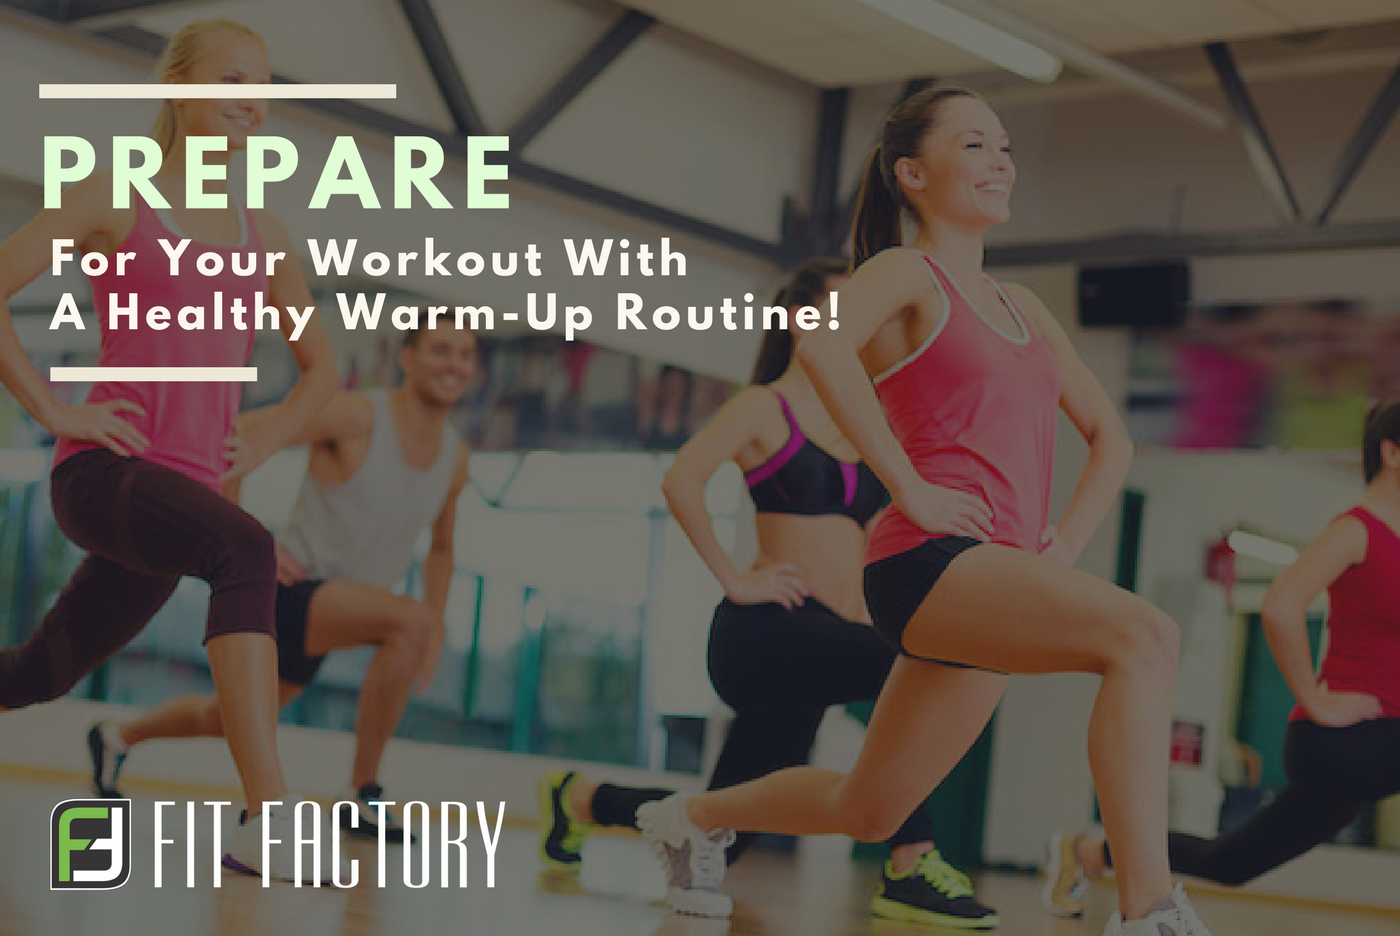 Prepare for Your Workout with a Healthy Warm-Up Routine